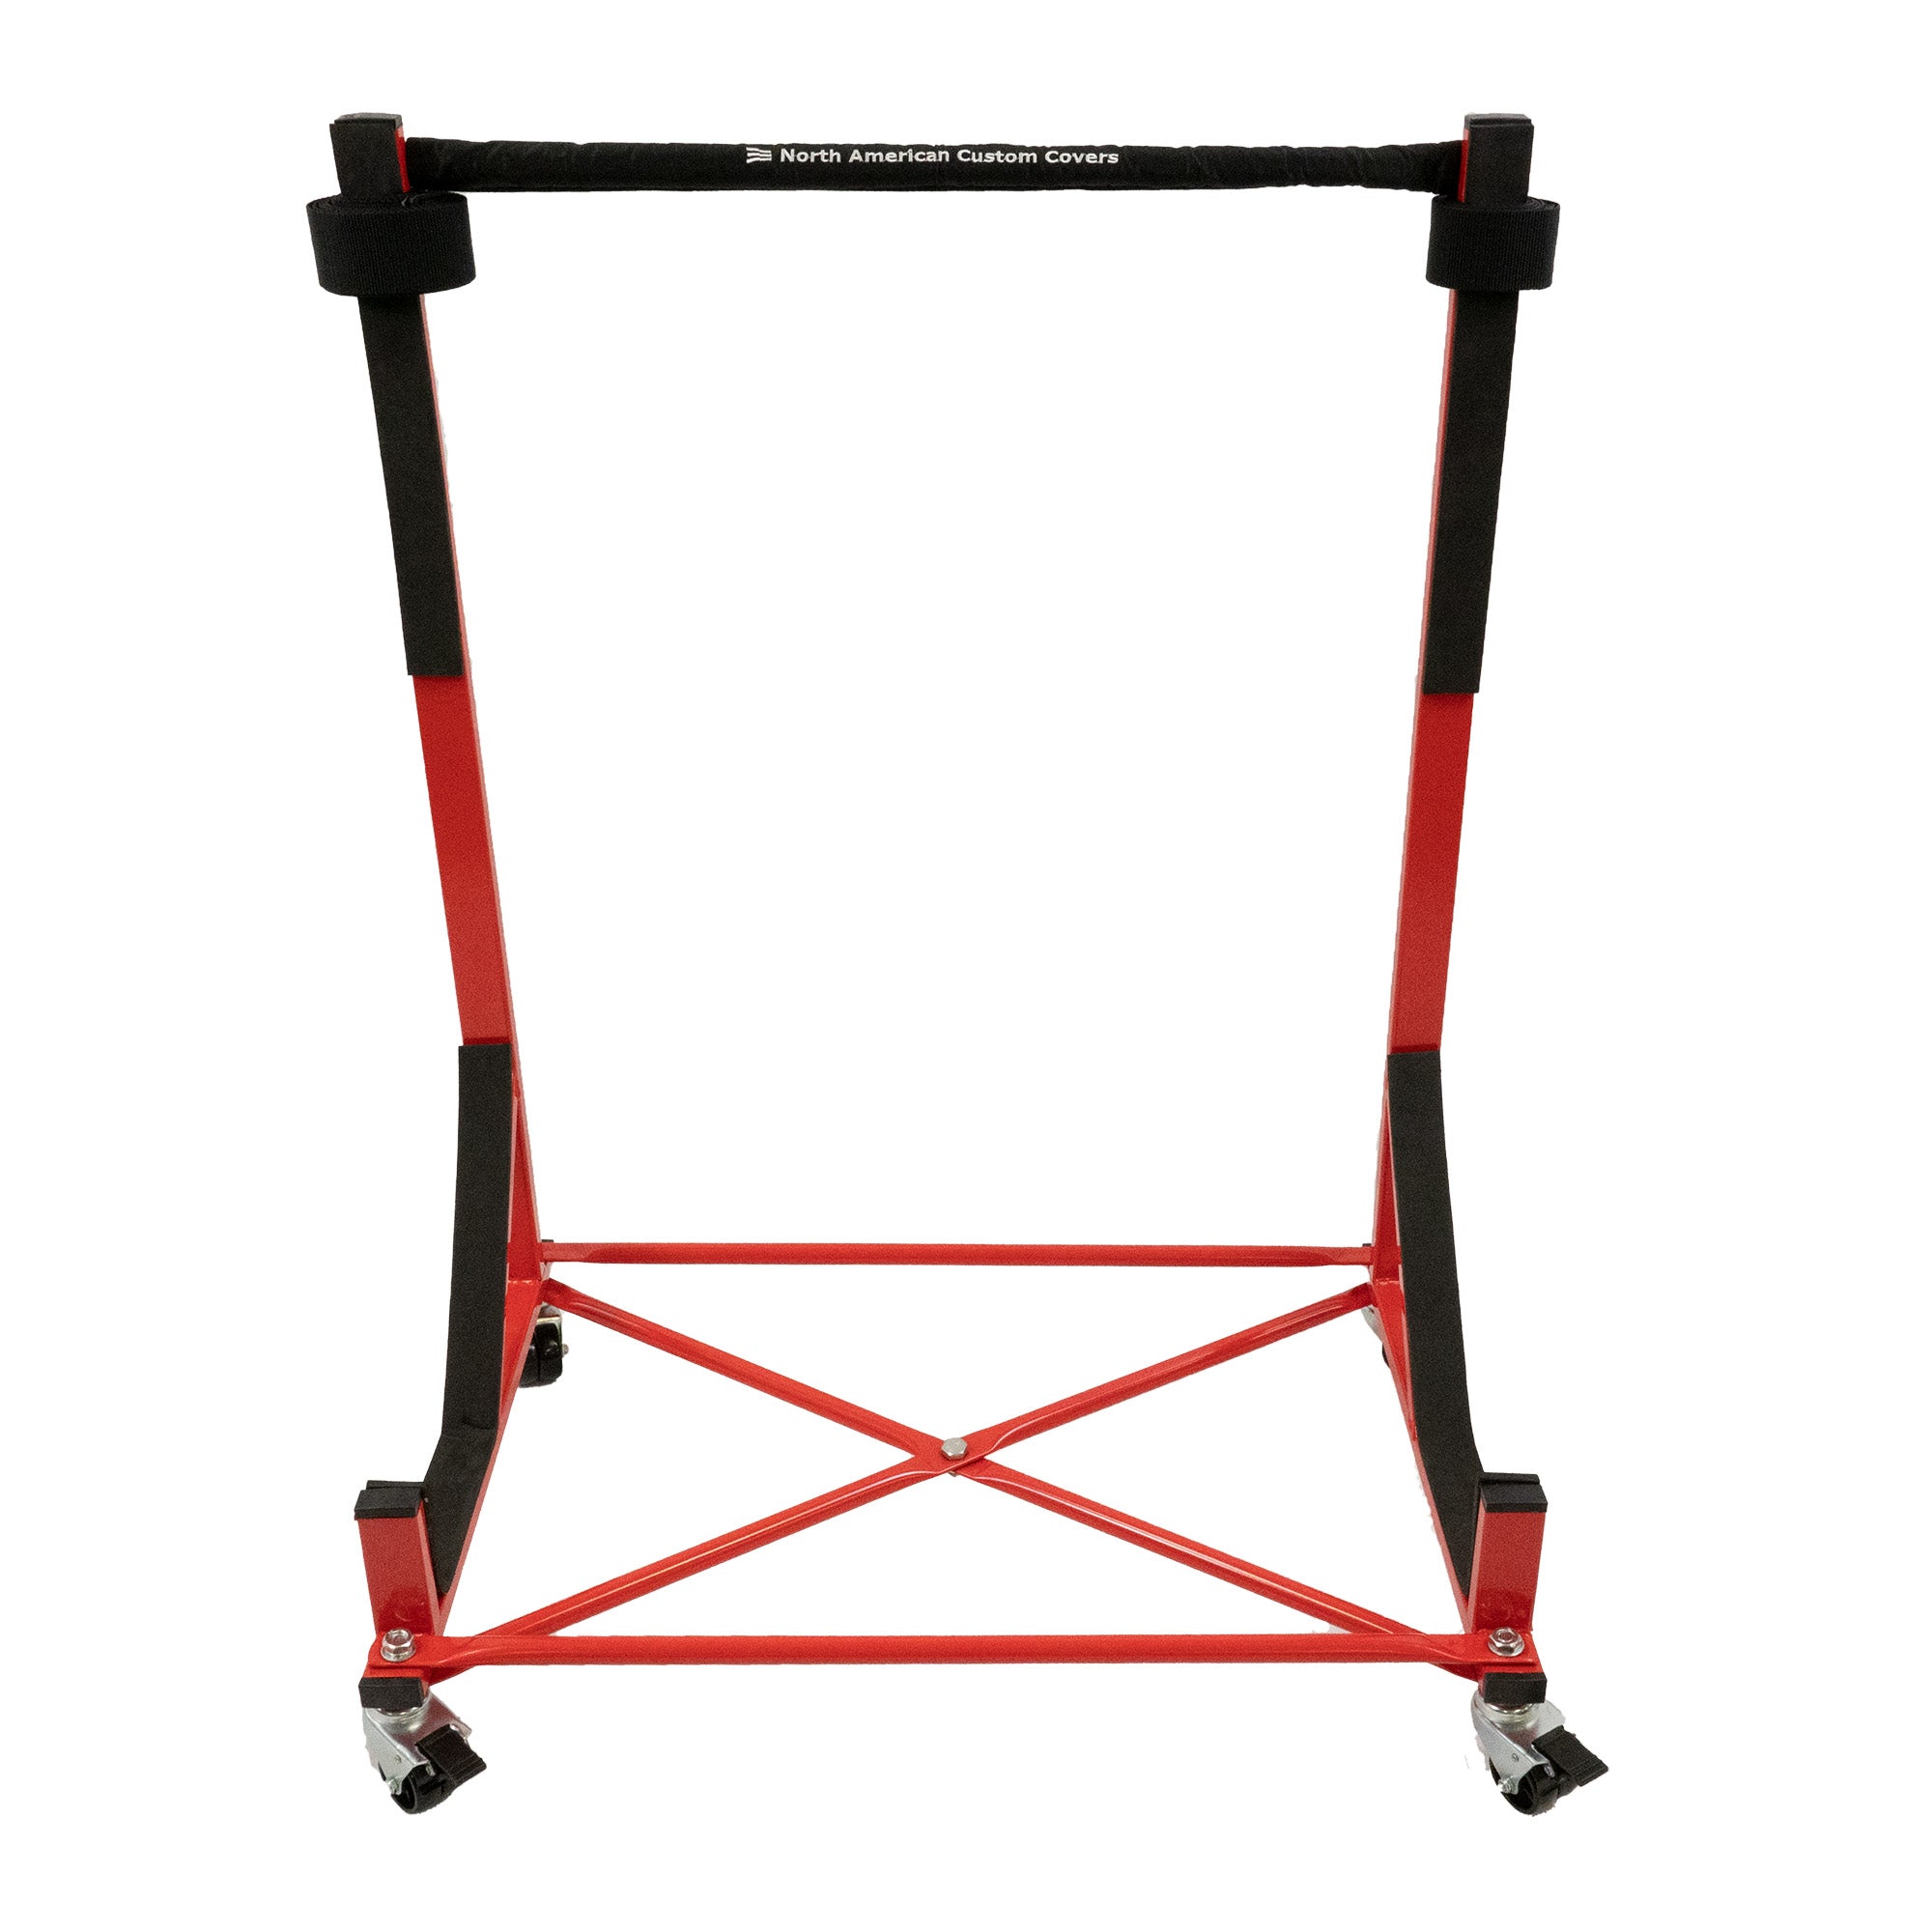 Porsche 911 996 997 Heavy-duty Hardtop Stand Trolley Cart Rack (Red) with Securing Harness and Hard Top Dust Cover (050R)